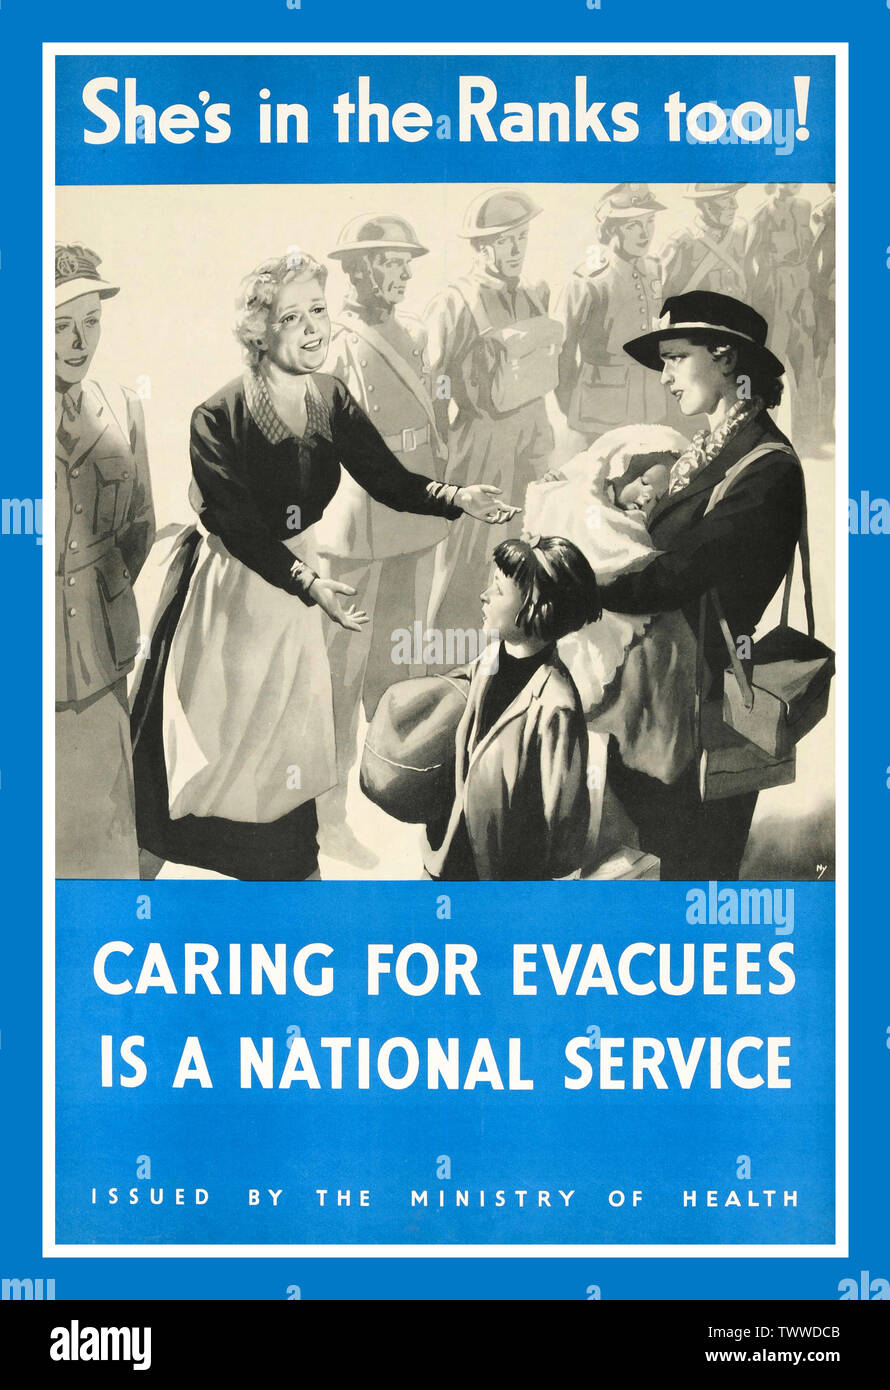 Vintage UK British WW2 World War Two propaganda poster: “She's in the Ranks Too!” – Caring For Evacuees Is A National Service. Black and white illustration featuring a middle-aged lady wearing an apron and stepping forward from a row of national service workers in uniform with her arms outstretched towards a younger mother smartly dressed in a hat and holding her sleeping baby with a young girl next to her holding their travel bags and packages, Issued by the Ministry of Health. The evacuation during WWII known as Operation Pied Piper started in 1939, organised by the Ministry of Health Stock Photo